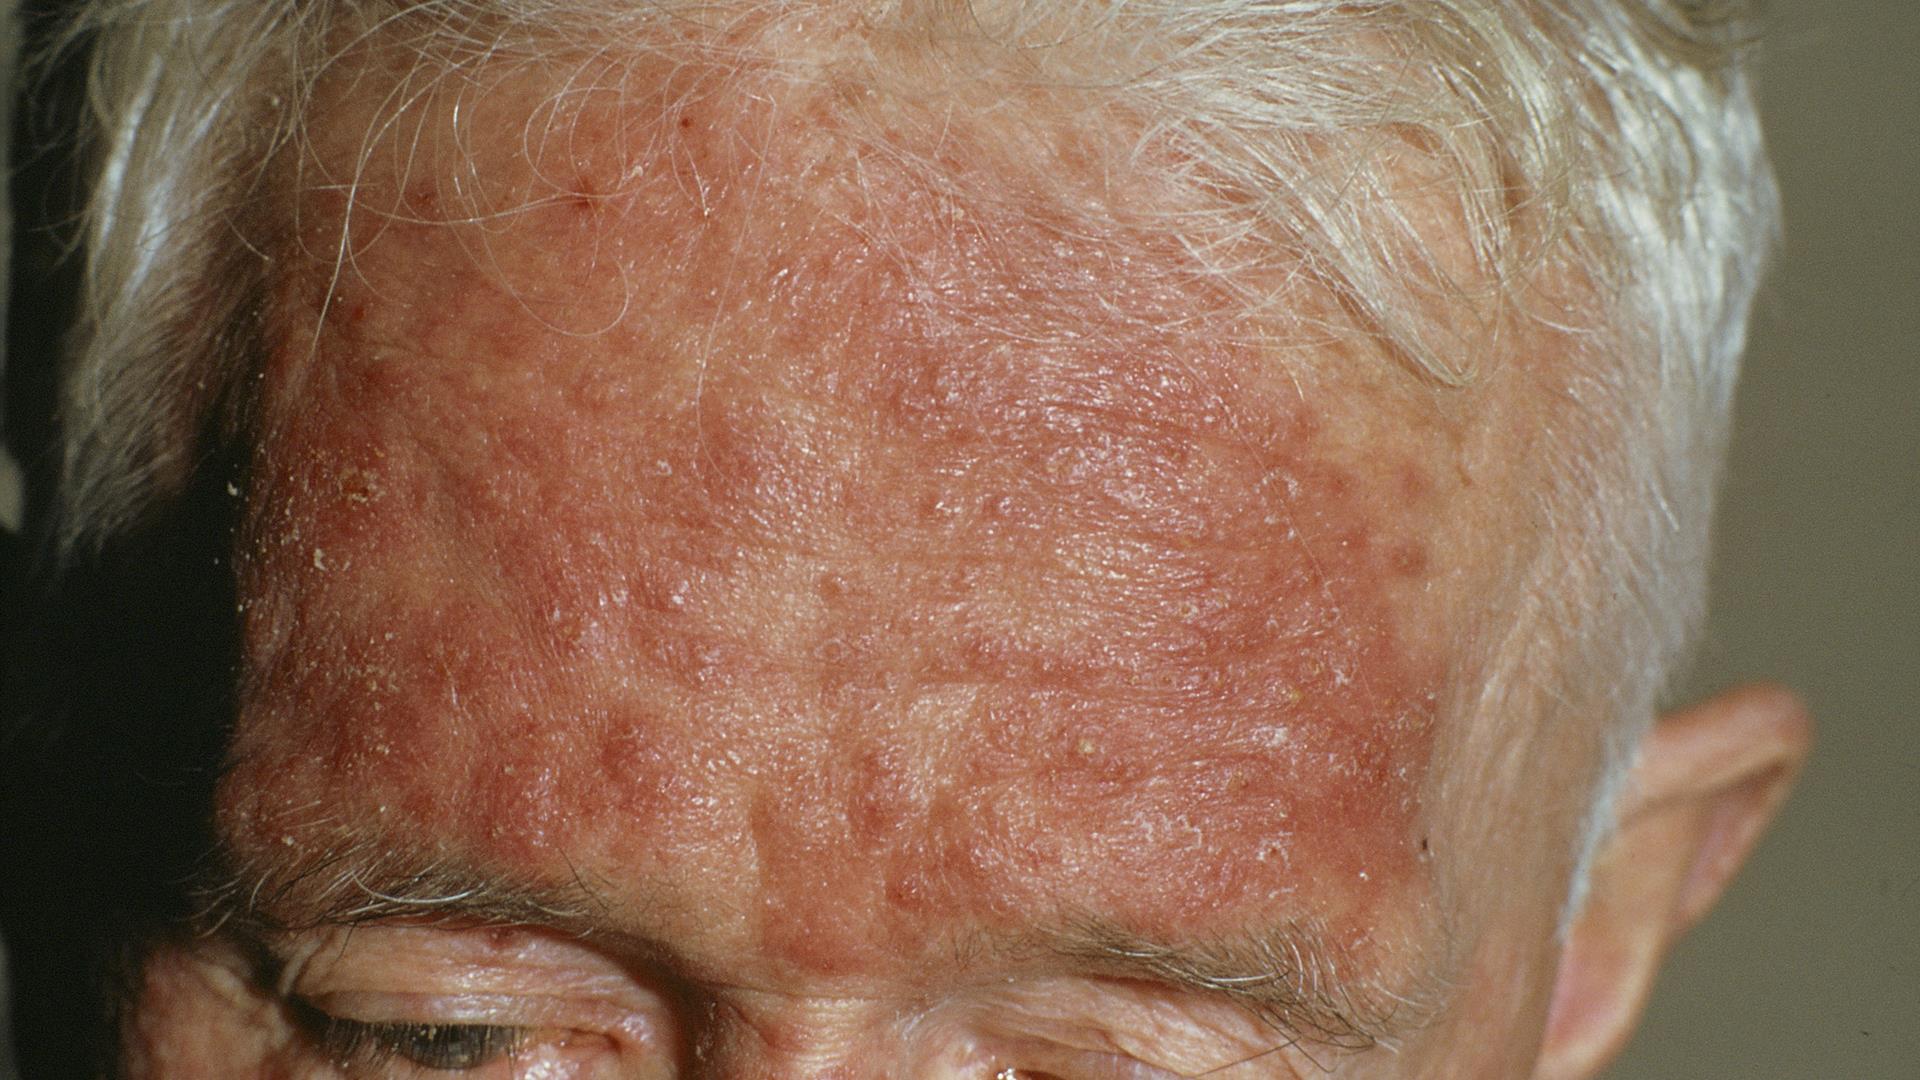 Is rosacea connected to other diseases?